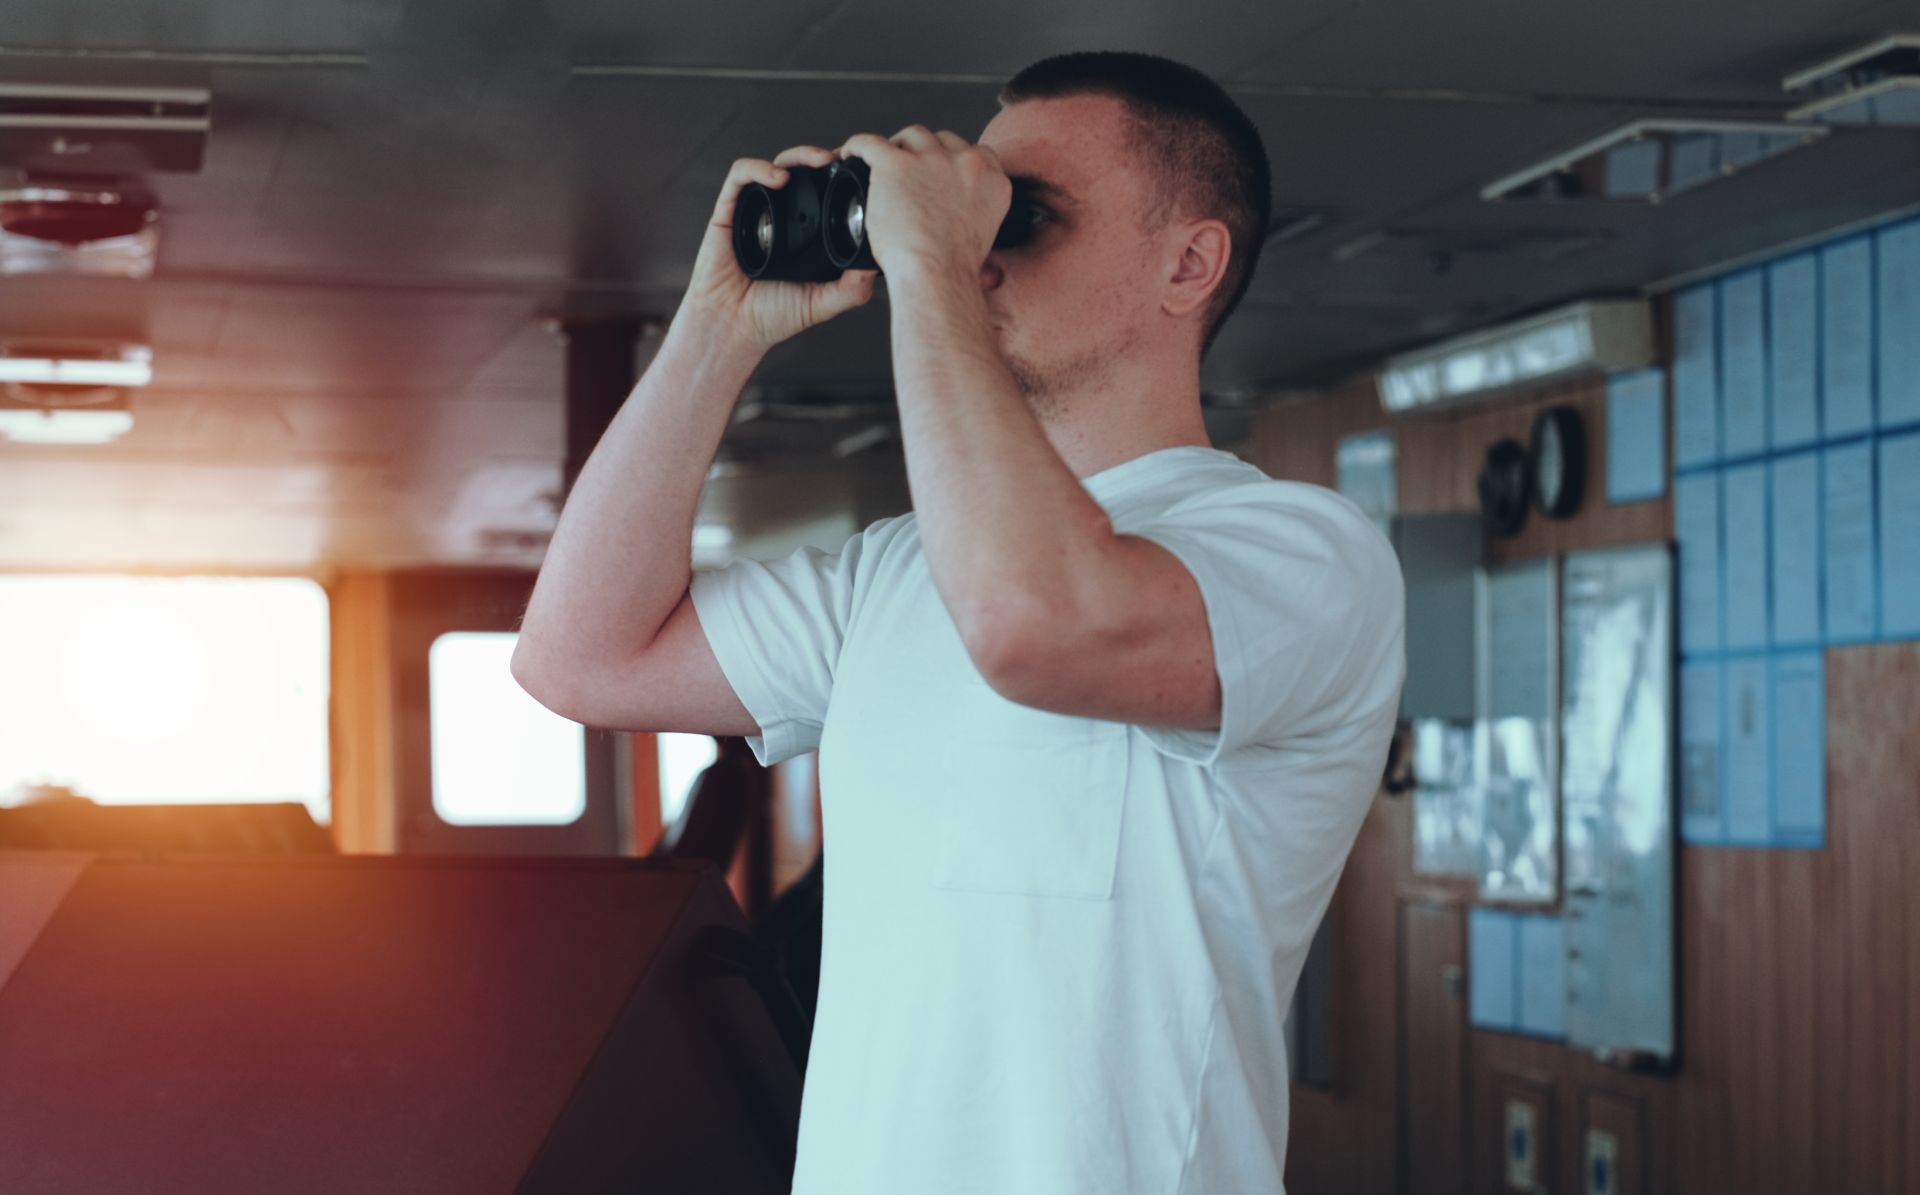 A young sailor in a white shirt using binoculars to look out from the ship's bridge, focusing on distant views for navigation or safety.